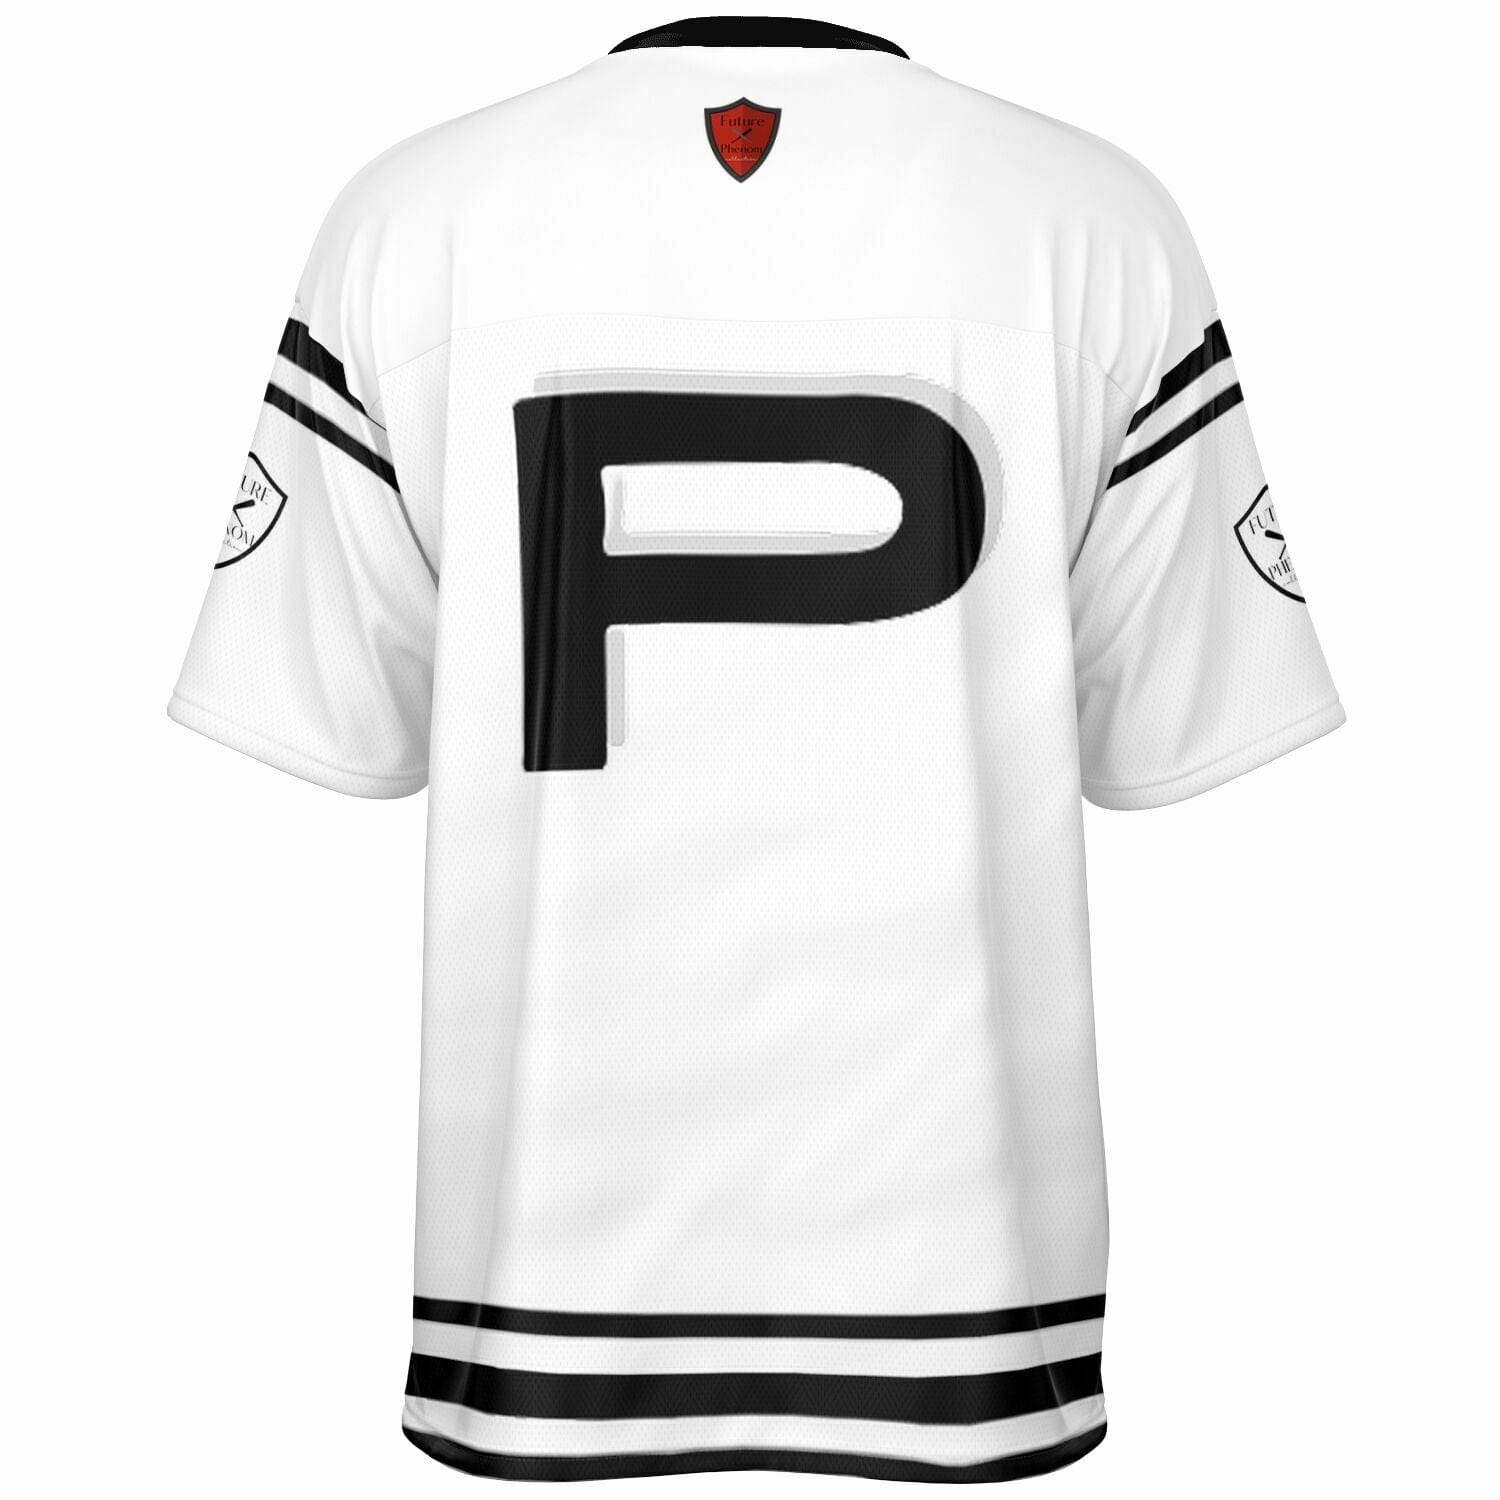 Football Jersey - AOP Letterman classic white jersey